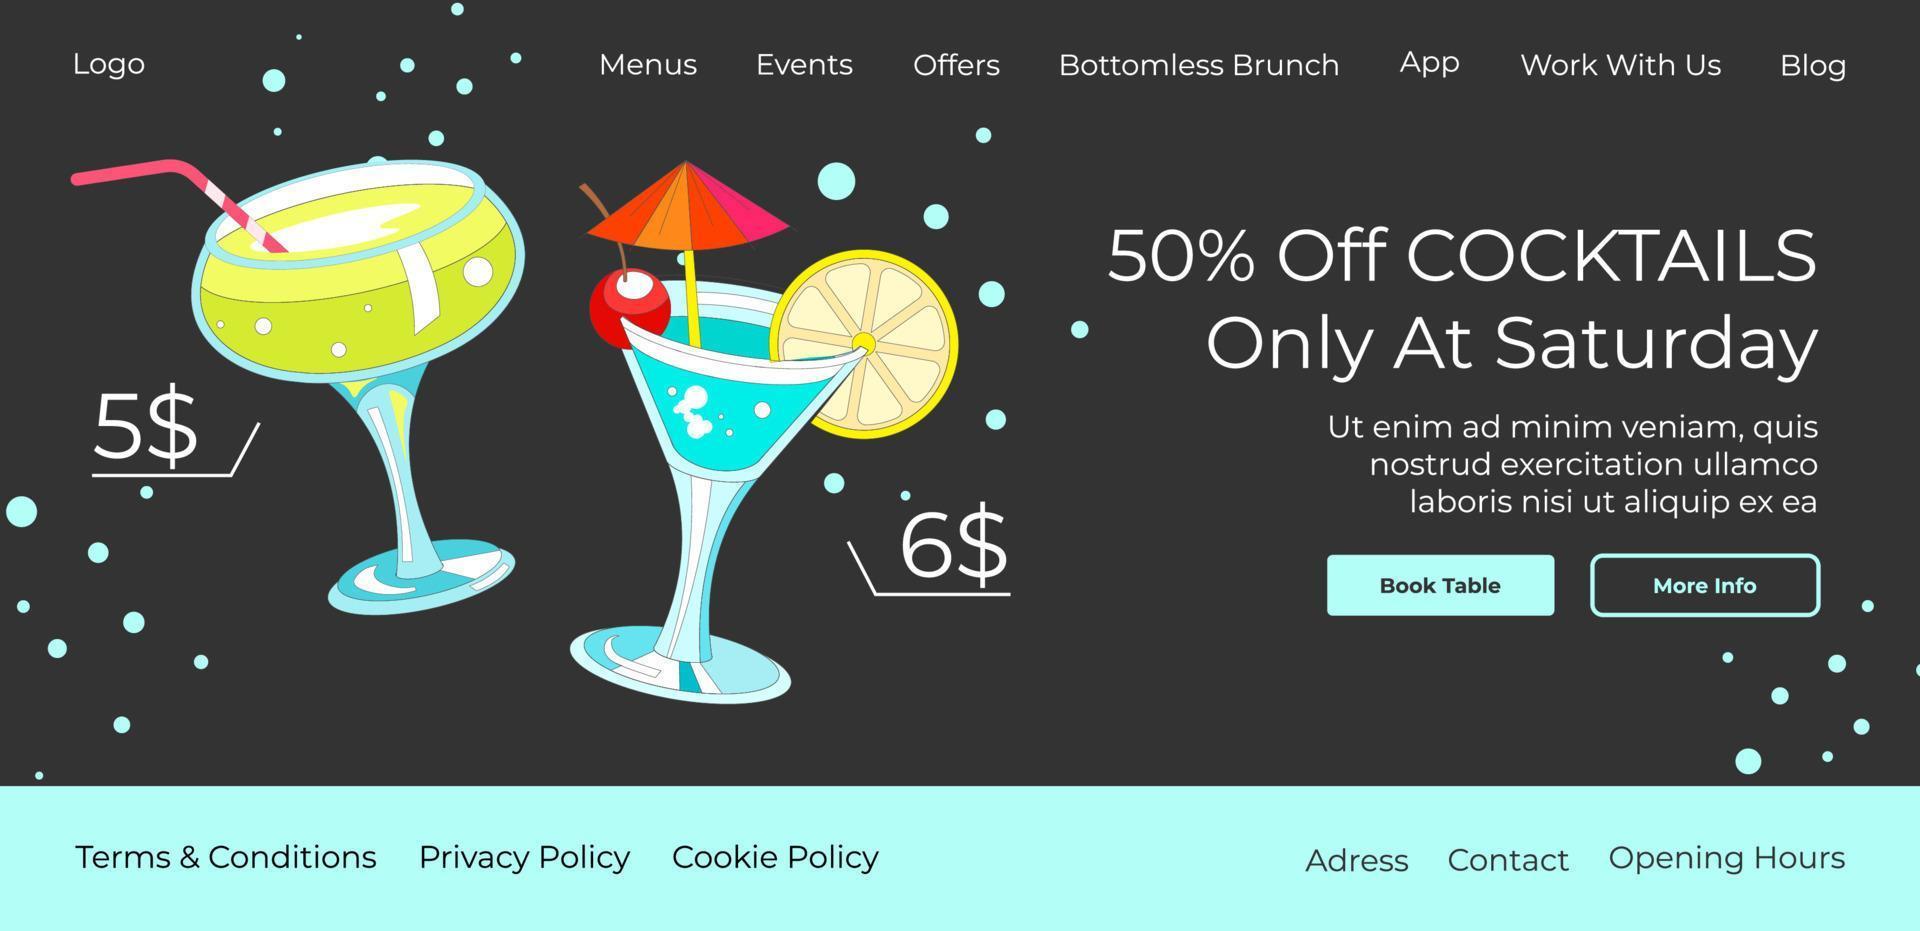 Discounts on cocktails only at saturday website vector